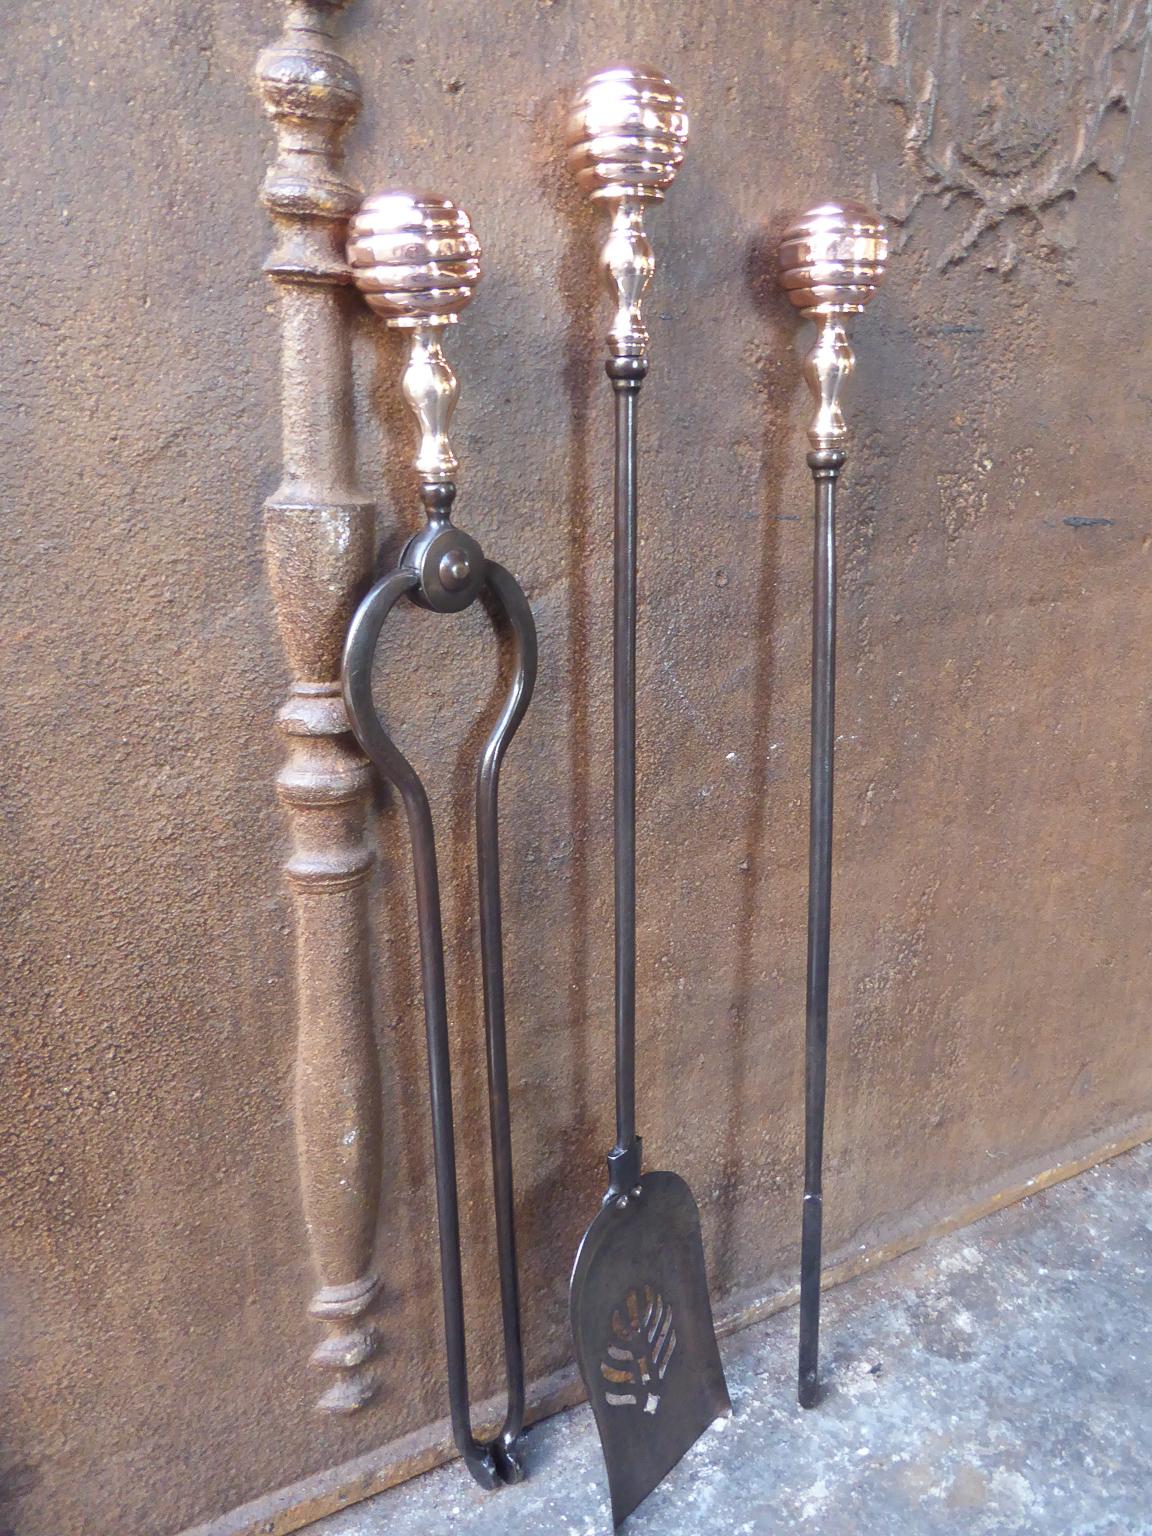 19th century English Victorian set of three tools with knobbed handles and a finely pierced and cut shovel. The fire tools are made of wrought iron and polished copper. The set is in a good condition and is fully functional.

